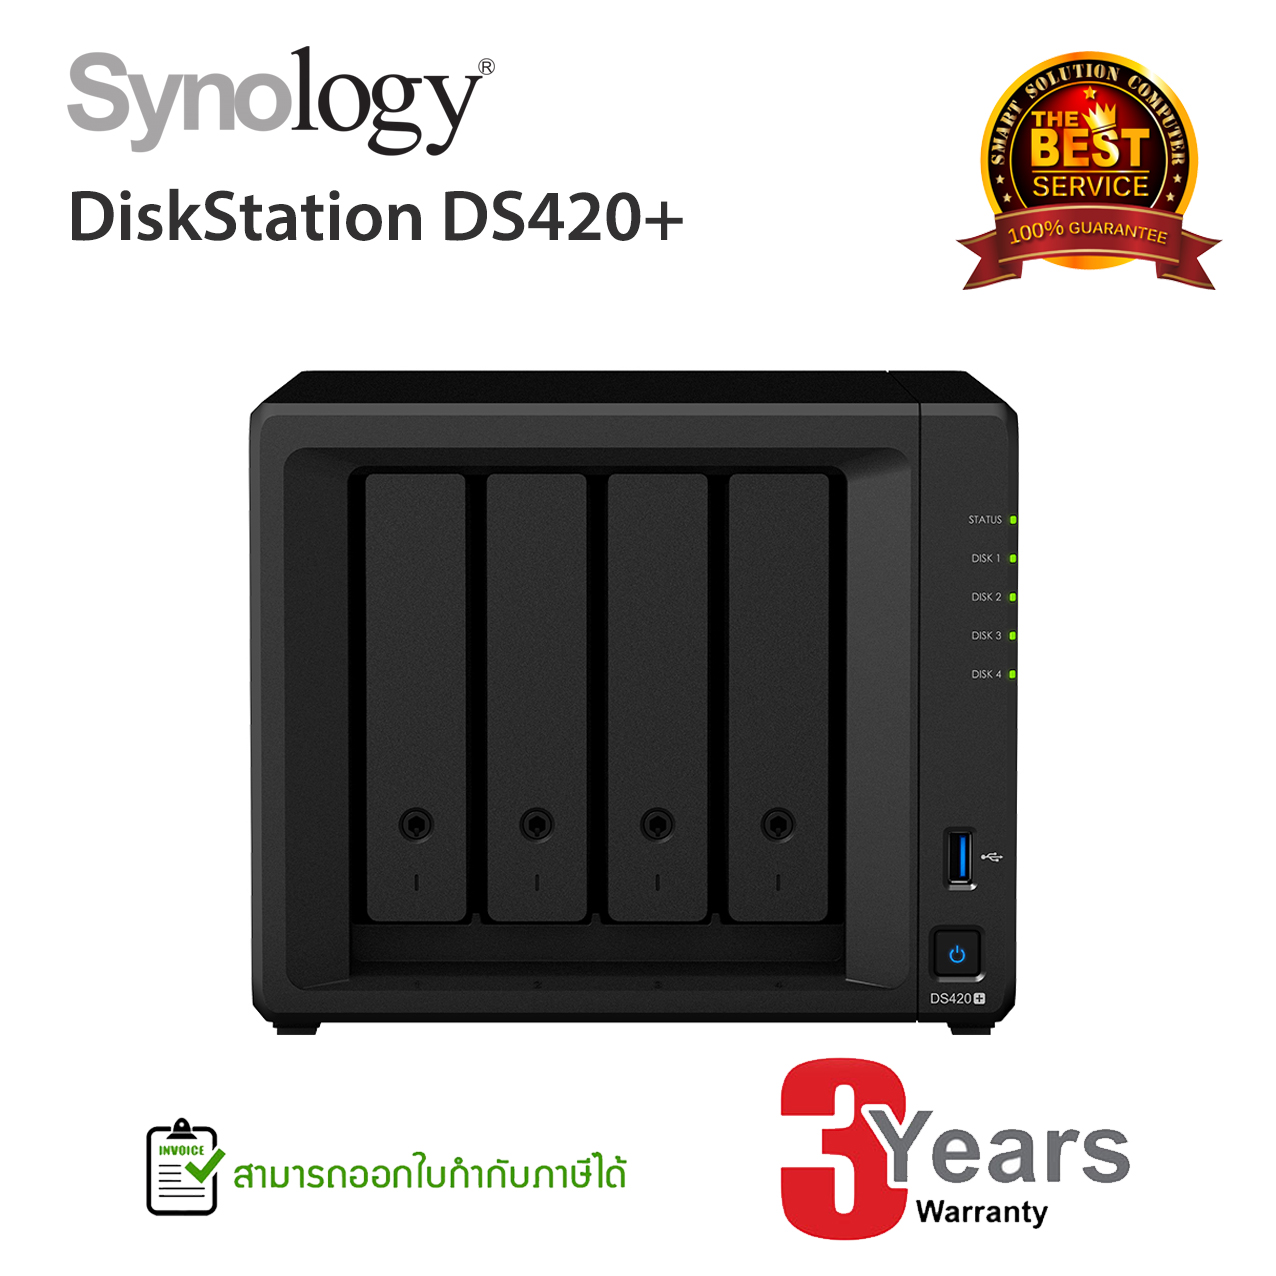 Synology DiskStation DS420+ 4-Bay NAS - NEW! 2020